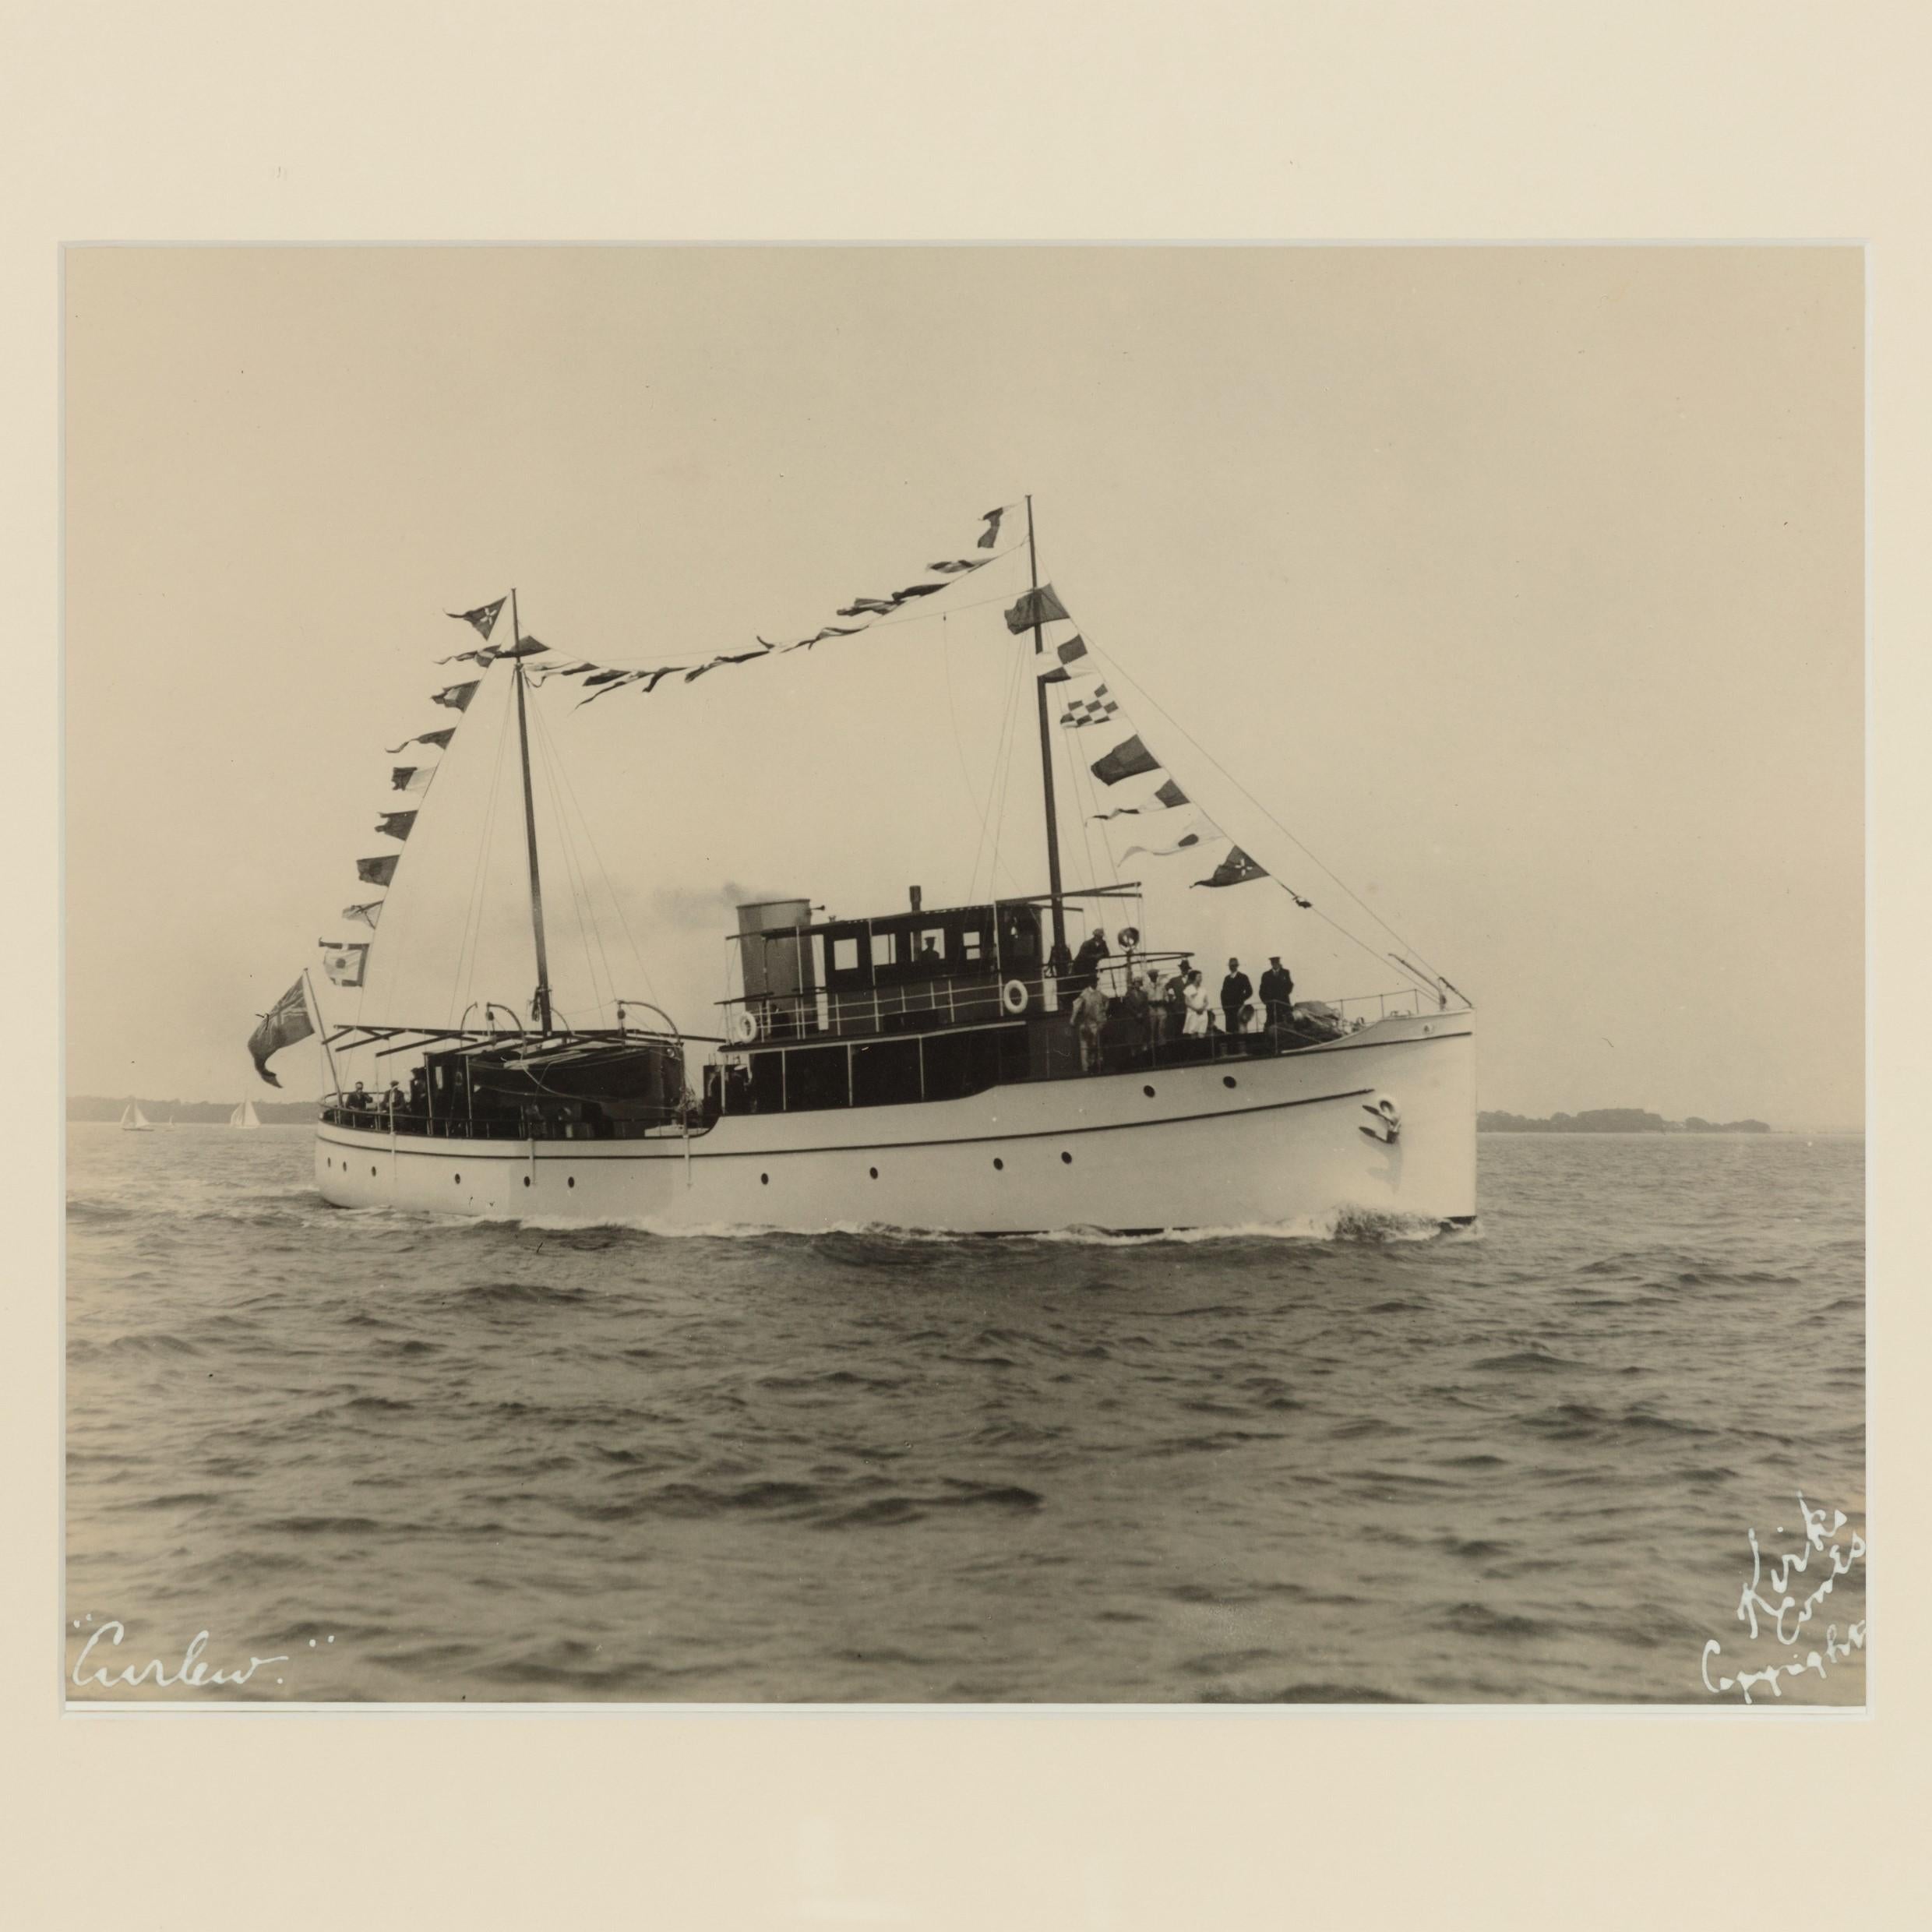 Early silver gelatin photographic print of the sailing yacht Curlew dressed overall, by Kirk and sons. Signed in white ink.

William Umpleby Kirk (Kirk and Sons) A photographer of the late Victorian era. Born in Hull and grew up nearby where, in